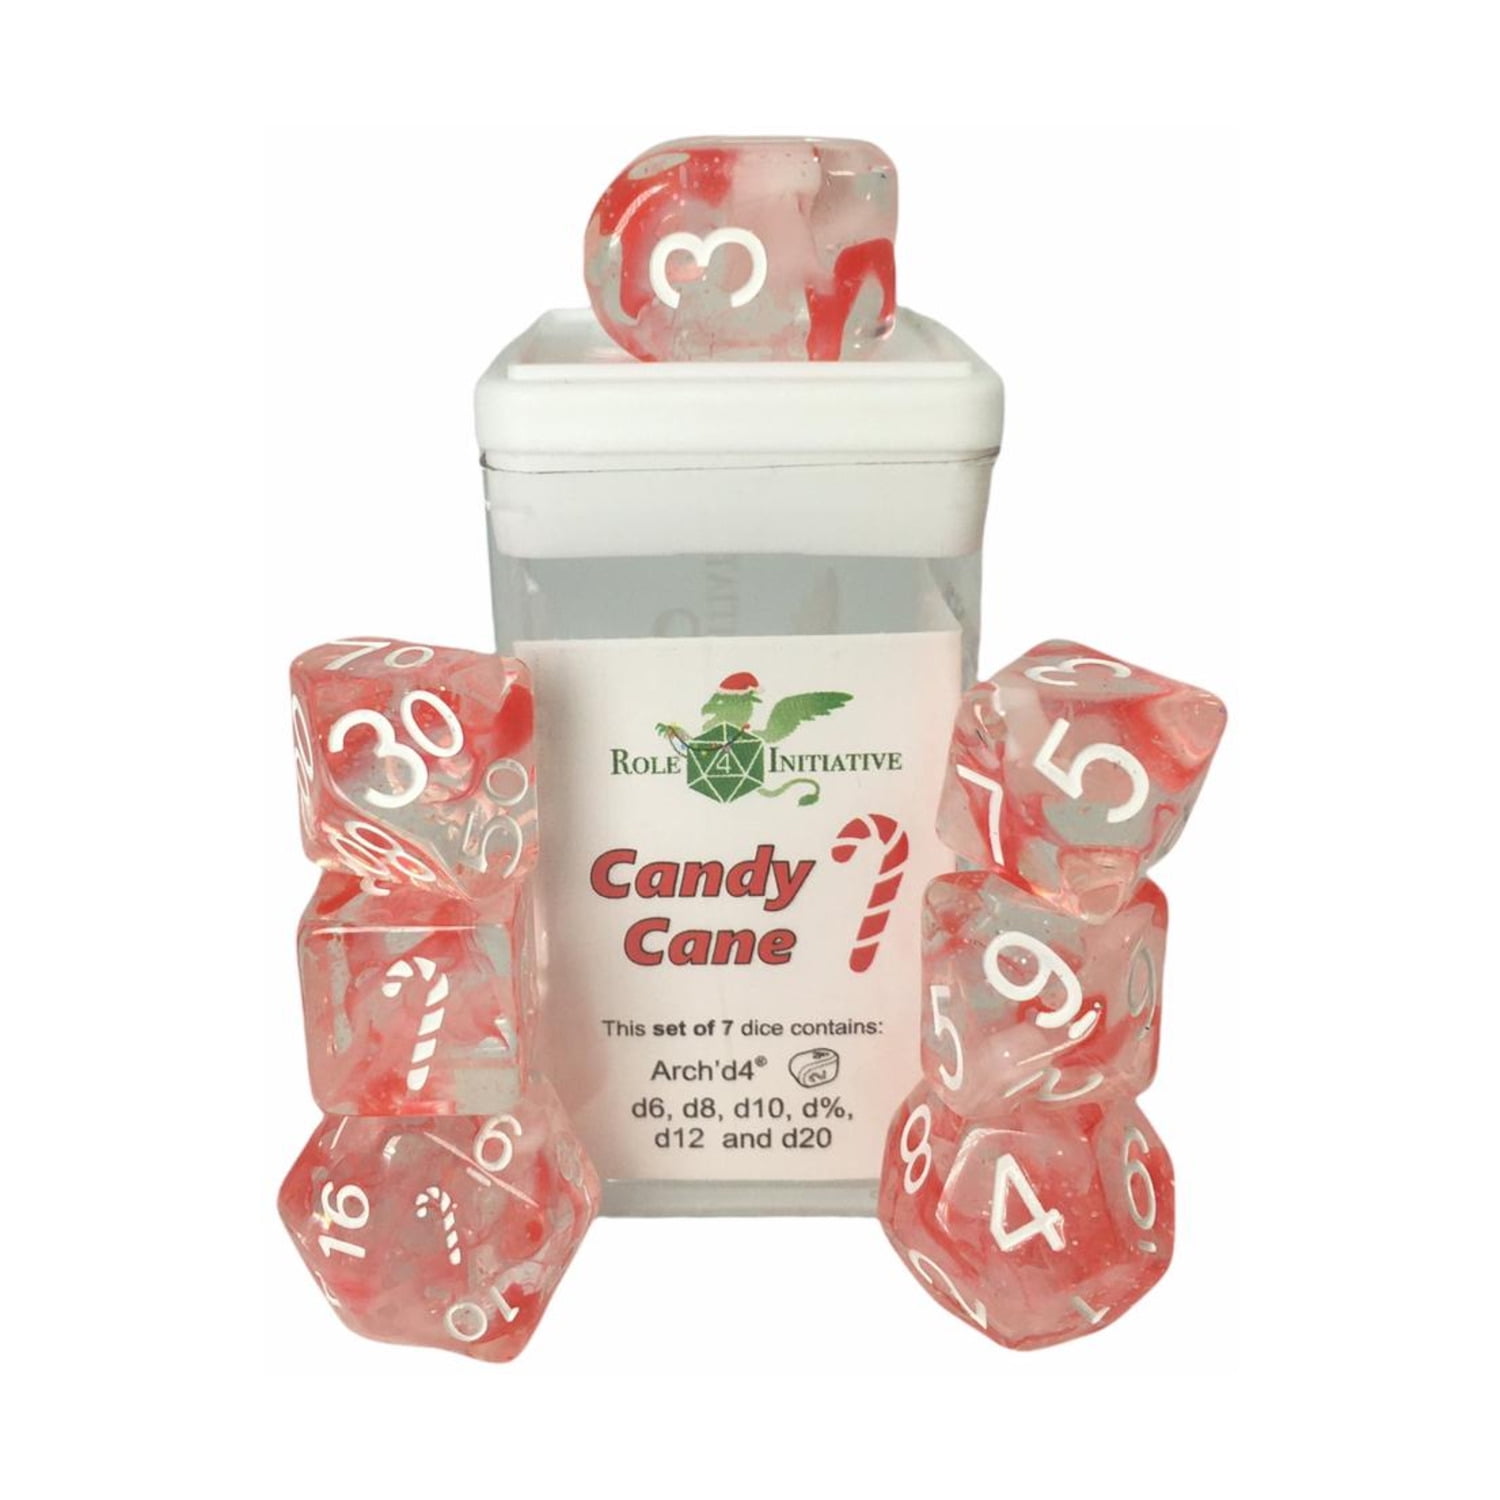 Picture of Role 4 Initiative R4I50901-7C Diffusion Candy Cane Dice - Set of 7